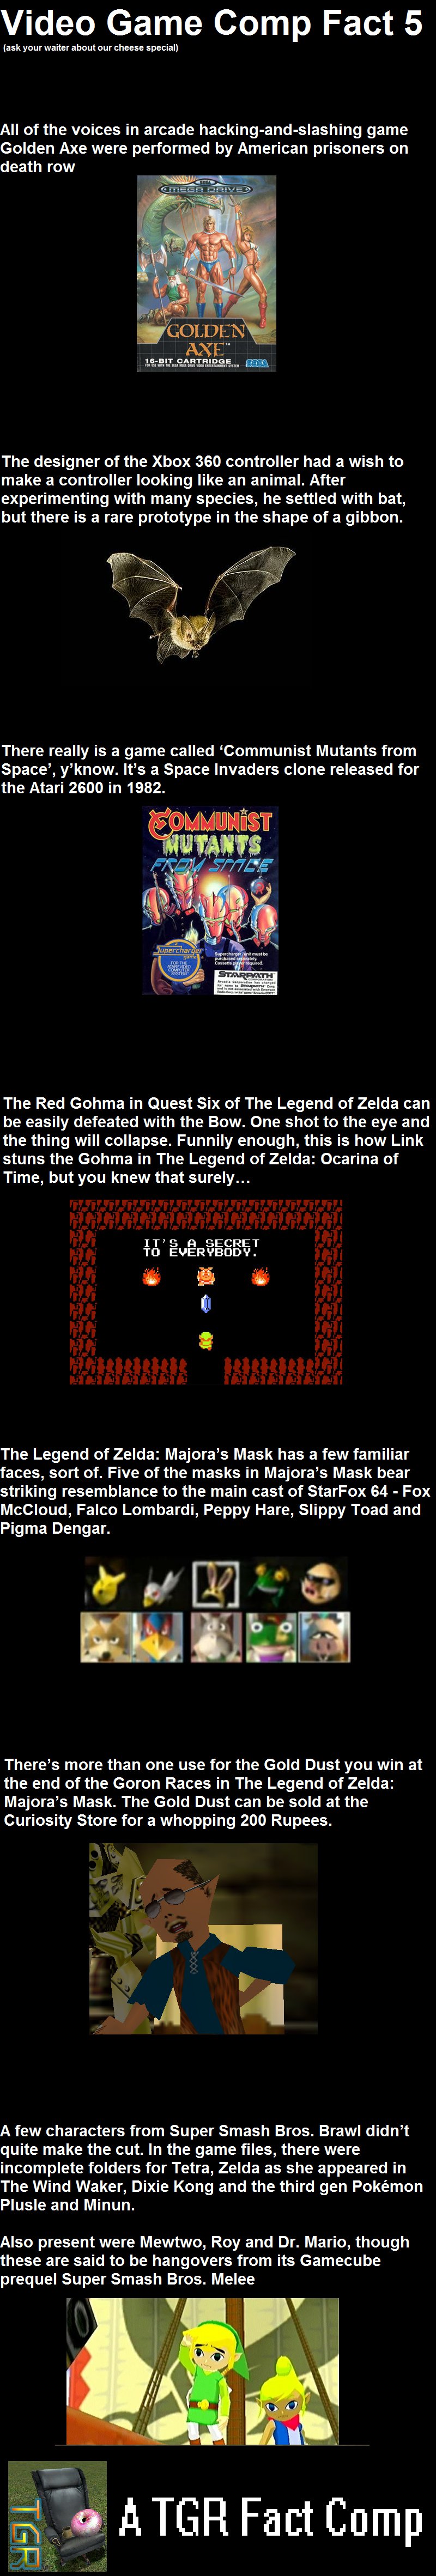 Video Game Fact Comp 5!